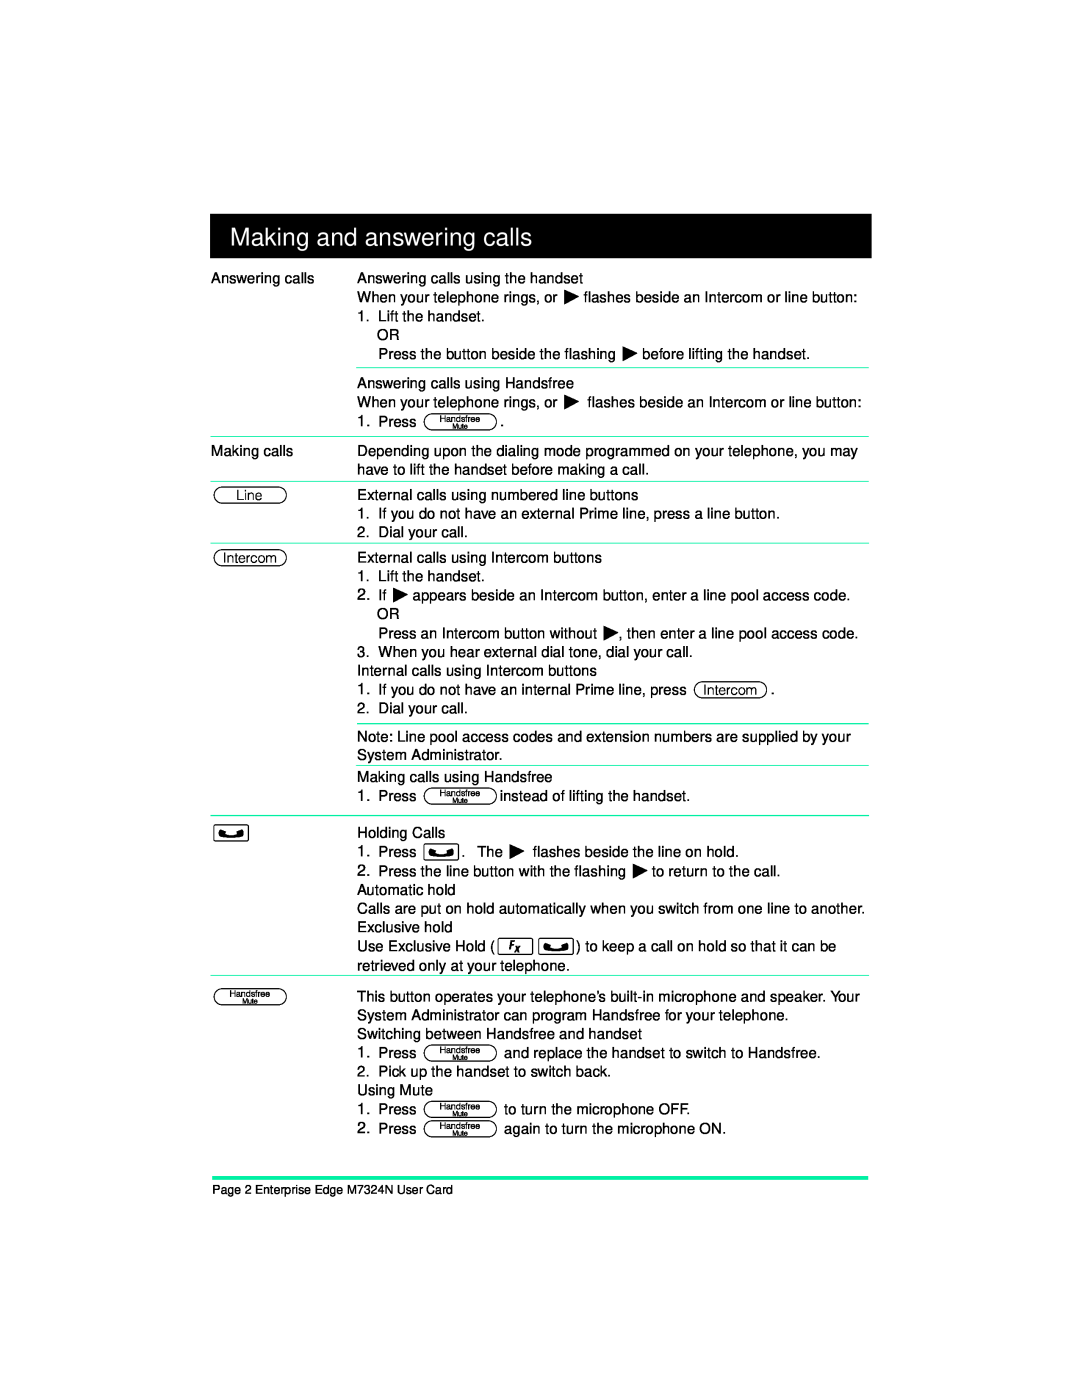 Nortel Networks manual Making and answering calls, Page 2 Enterprise Edge M7324N User Card 